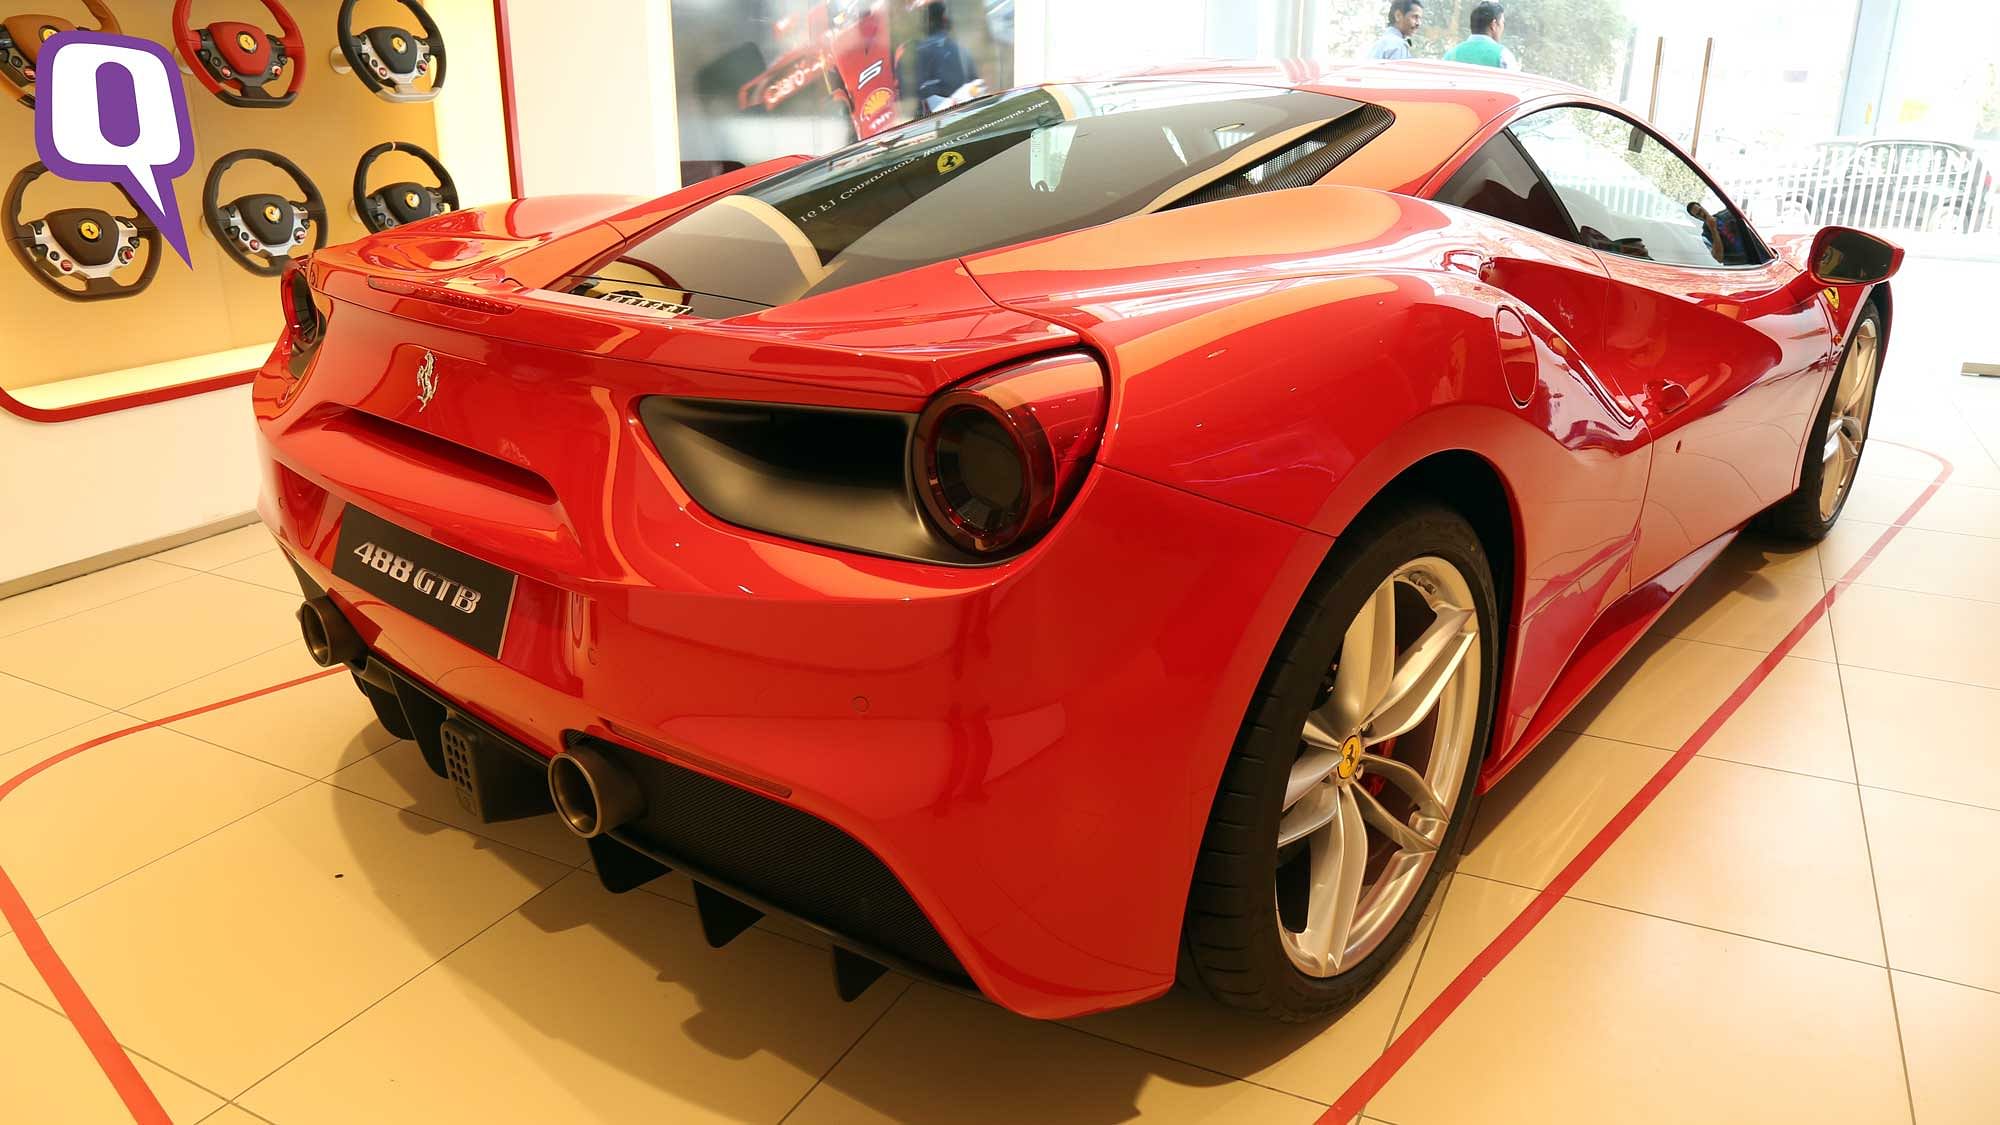 The Red Hot Ferrari 488 GTB Lands in India at Rs 3.88 Crore